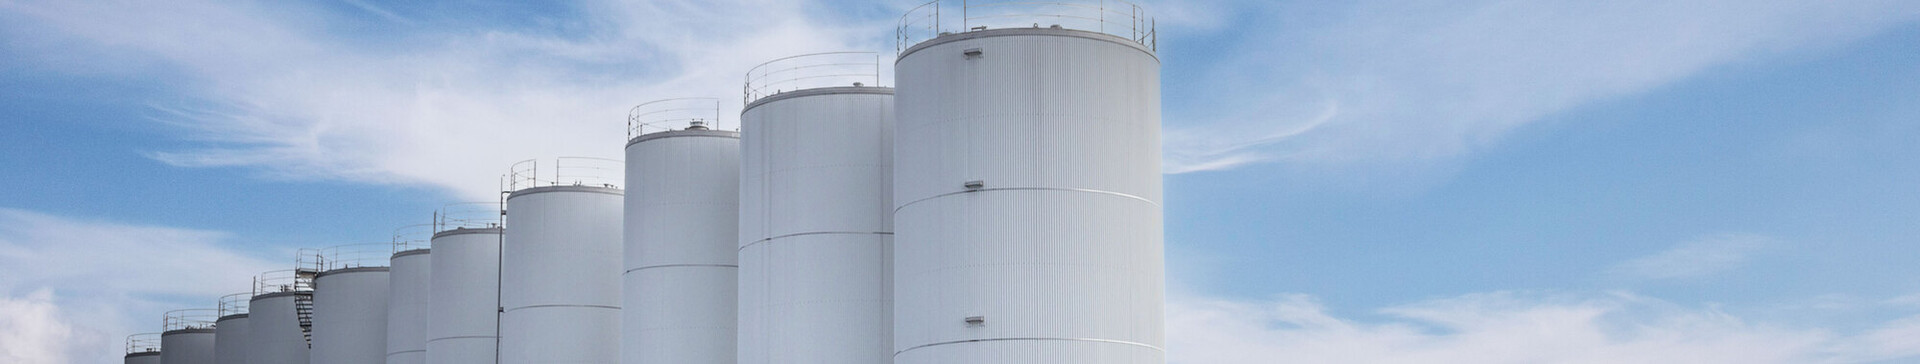 Storage tanks in all conceivable shapes and sizes